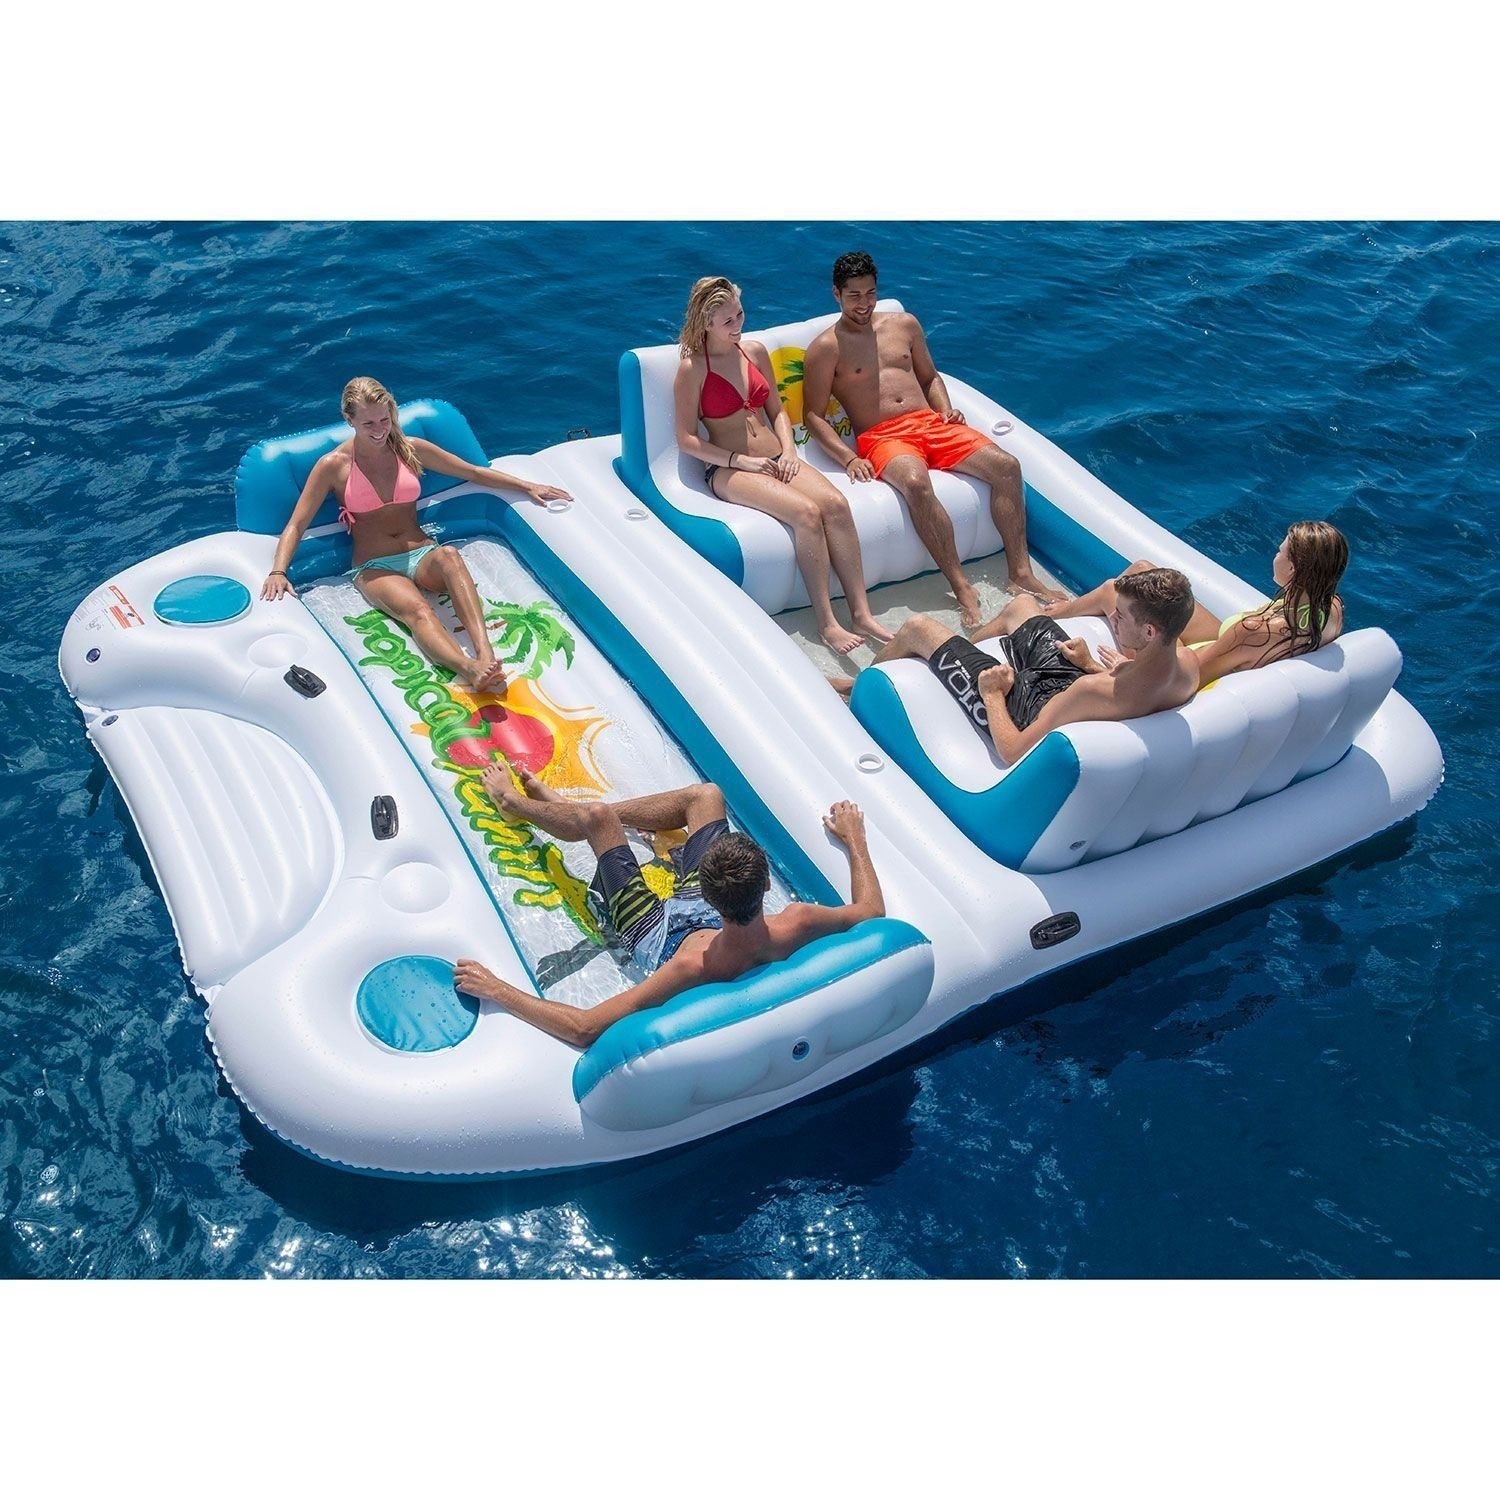 New Giant Inflatable Floating Island 6 Person Raft Pool Lake Float 15&#039;-8"x 9&#039;-4&#039;